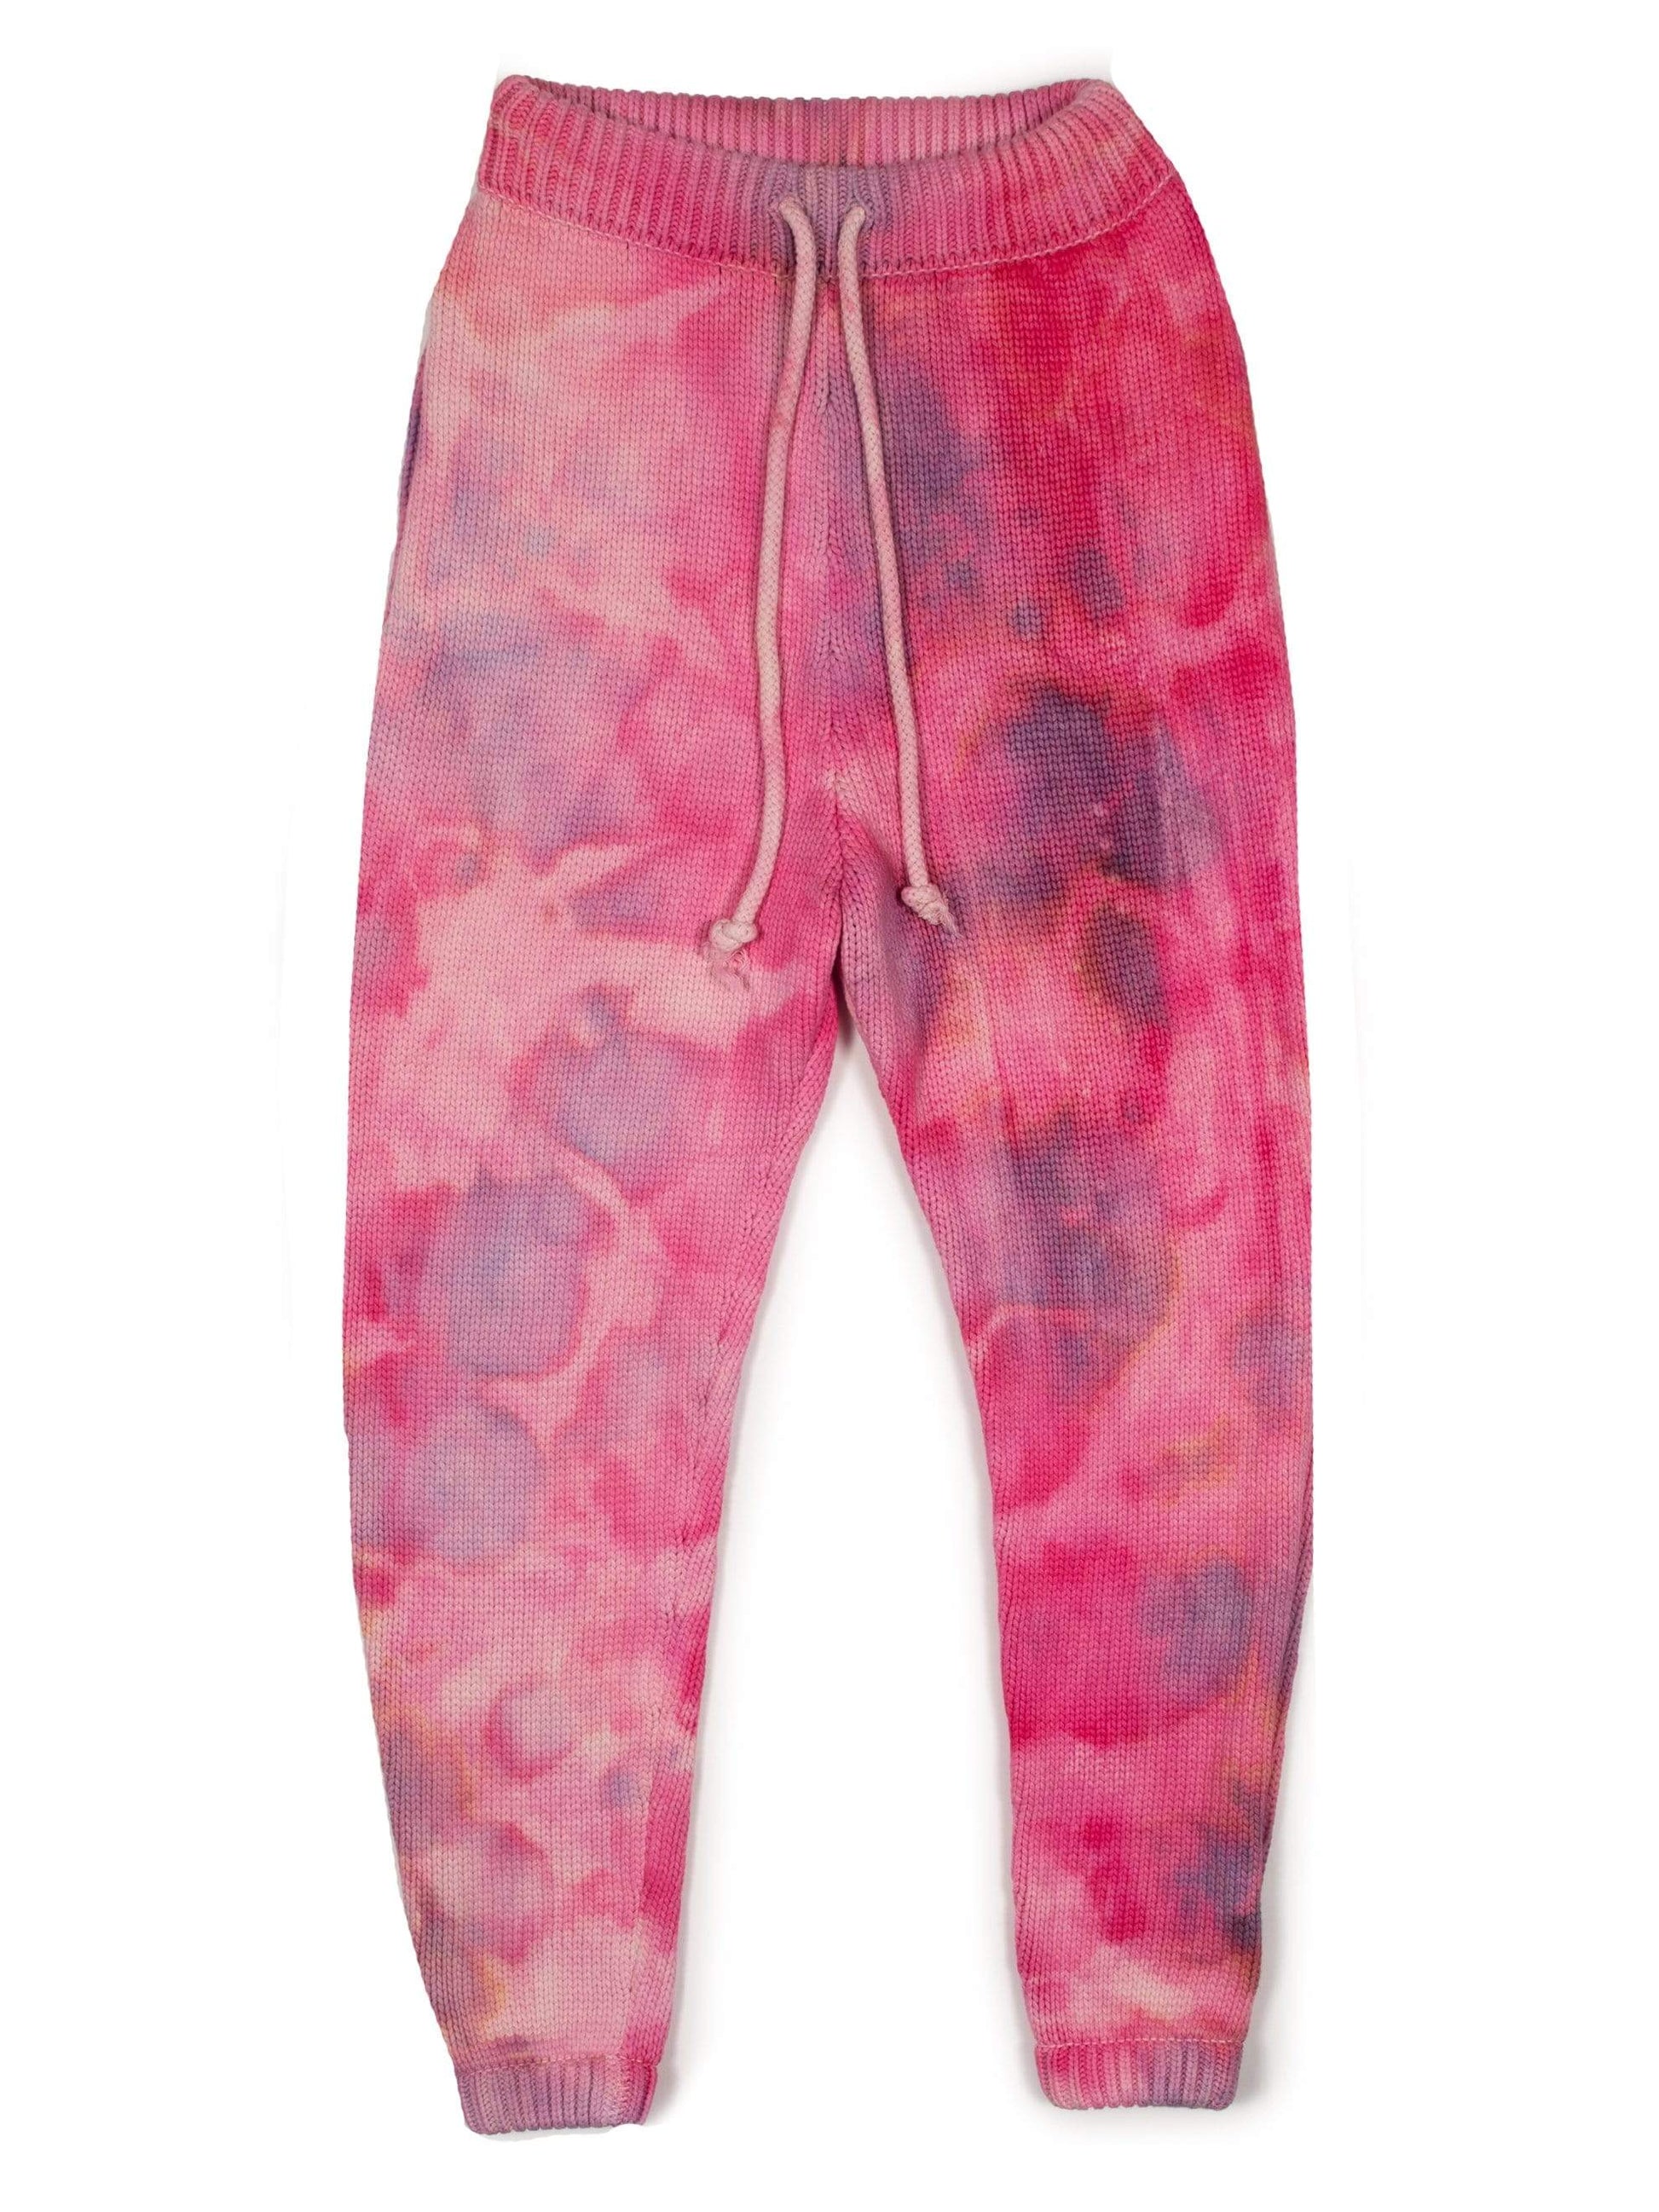 Camp High S/M / Pink Jersey Knit Pant